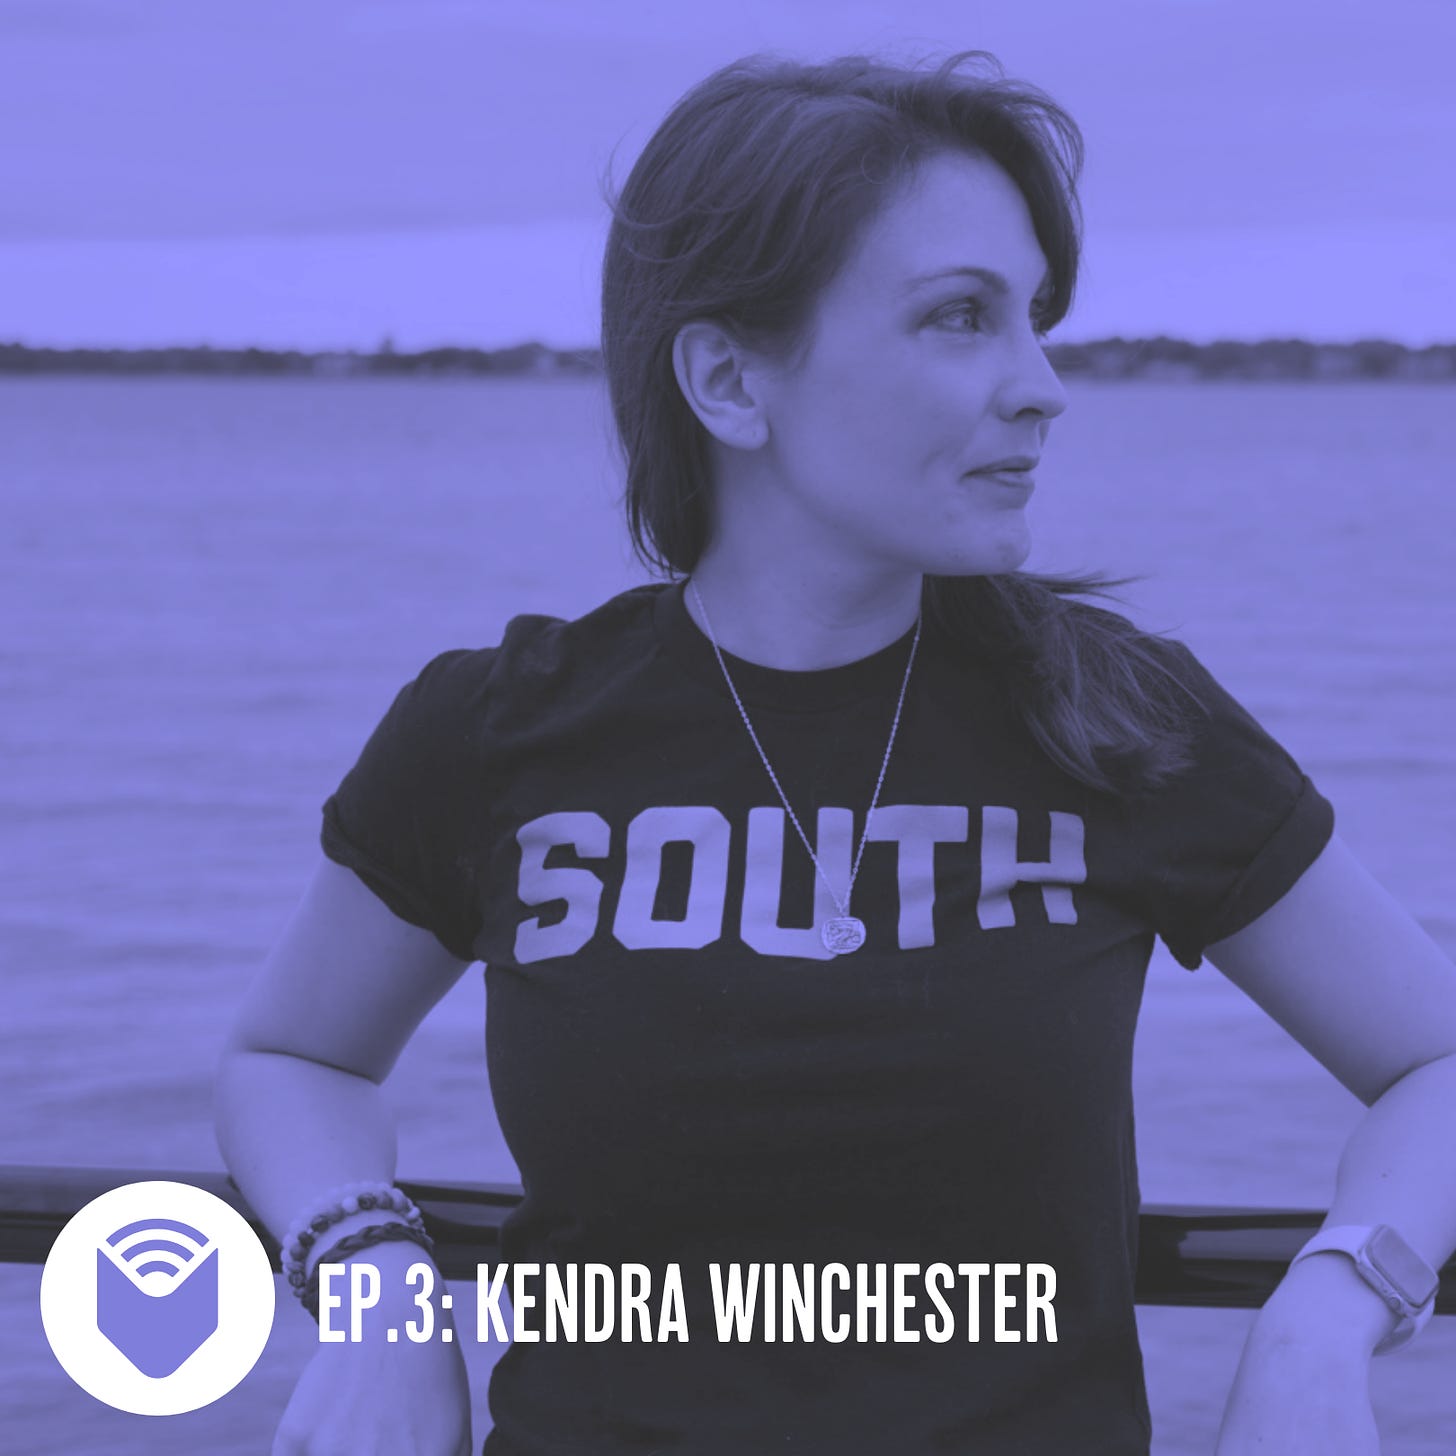 a graphic of the Libro.fm podcast that says, "Ep. 3 Kendra Winchester"